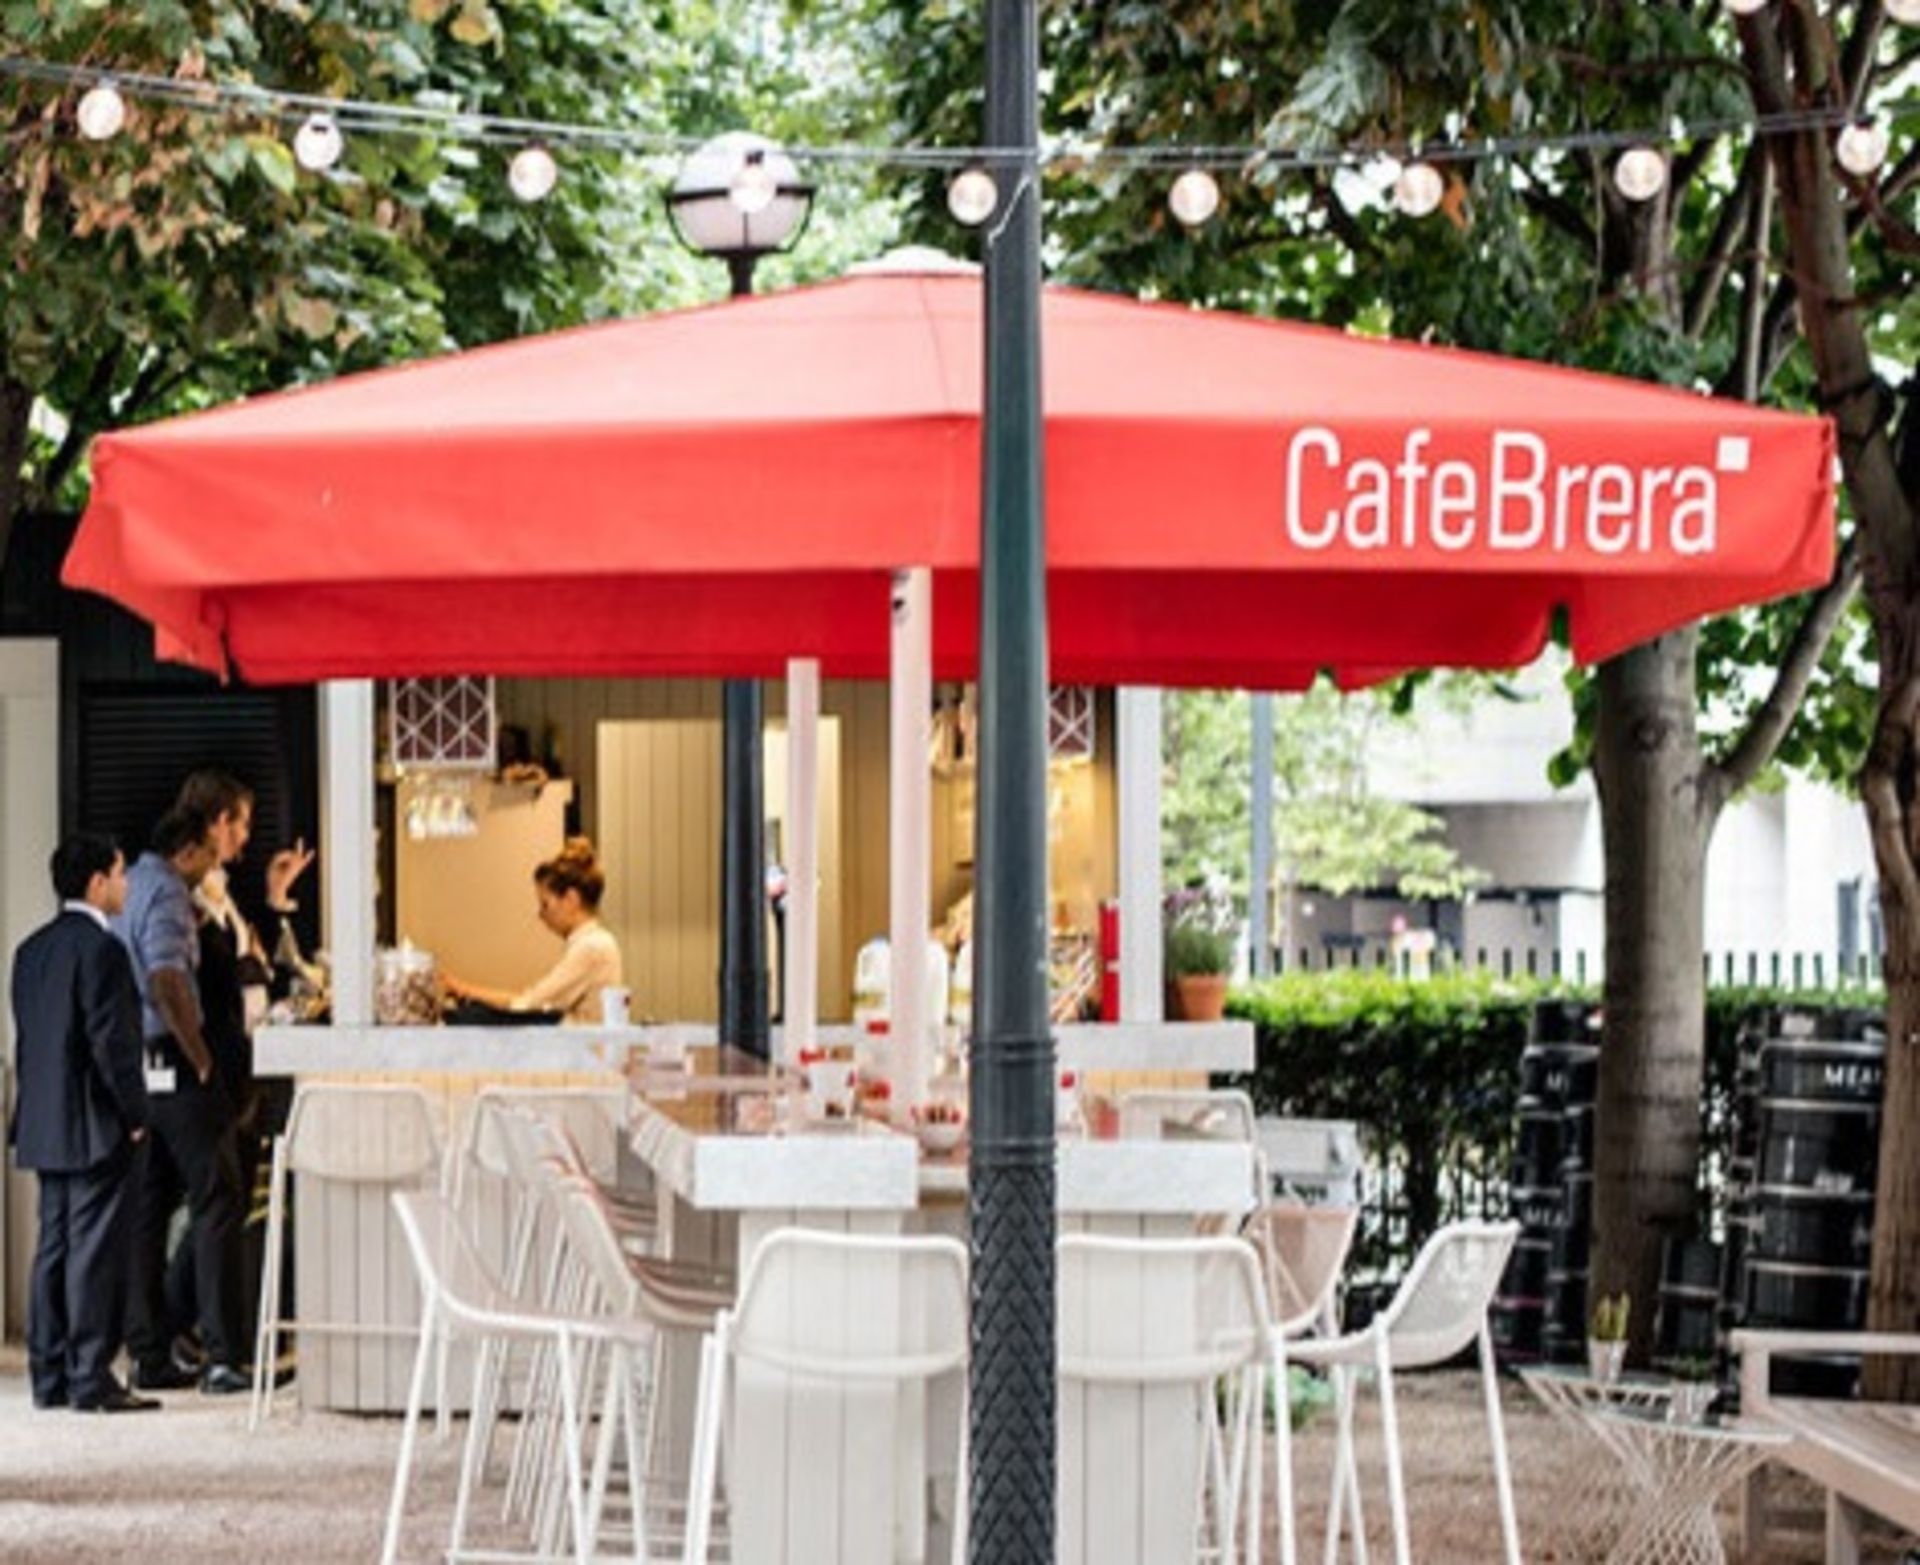 1 x Large Cafe Brera Outdoor Parasol With Heaters - Large Size Suitable For Pubs, Restaurants or